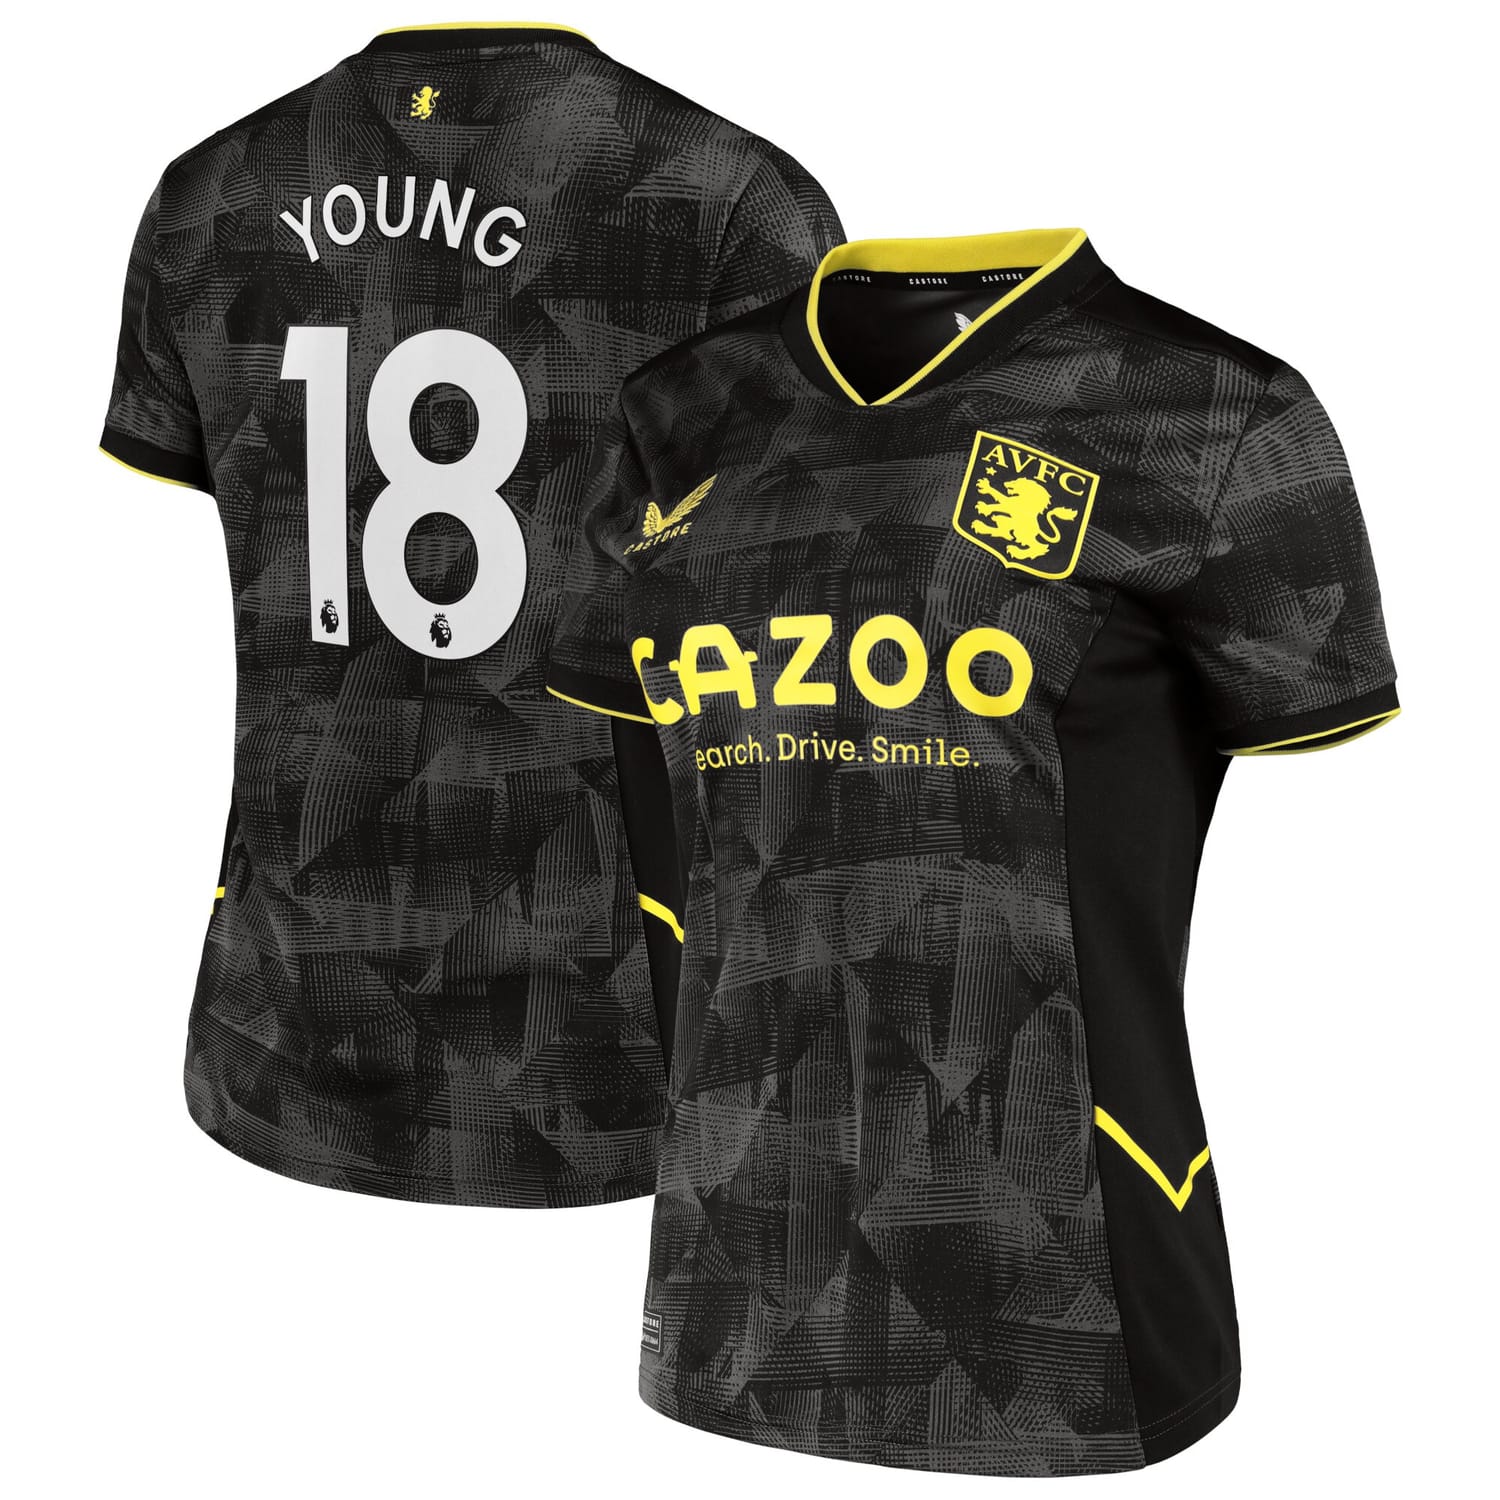 Premier League Ast. Villa Third Jersey Shirt 2022-23 player Ashley Young 18 printing for Women